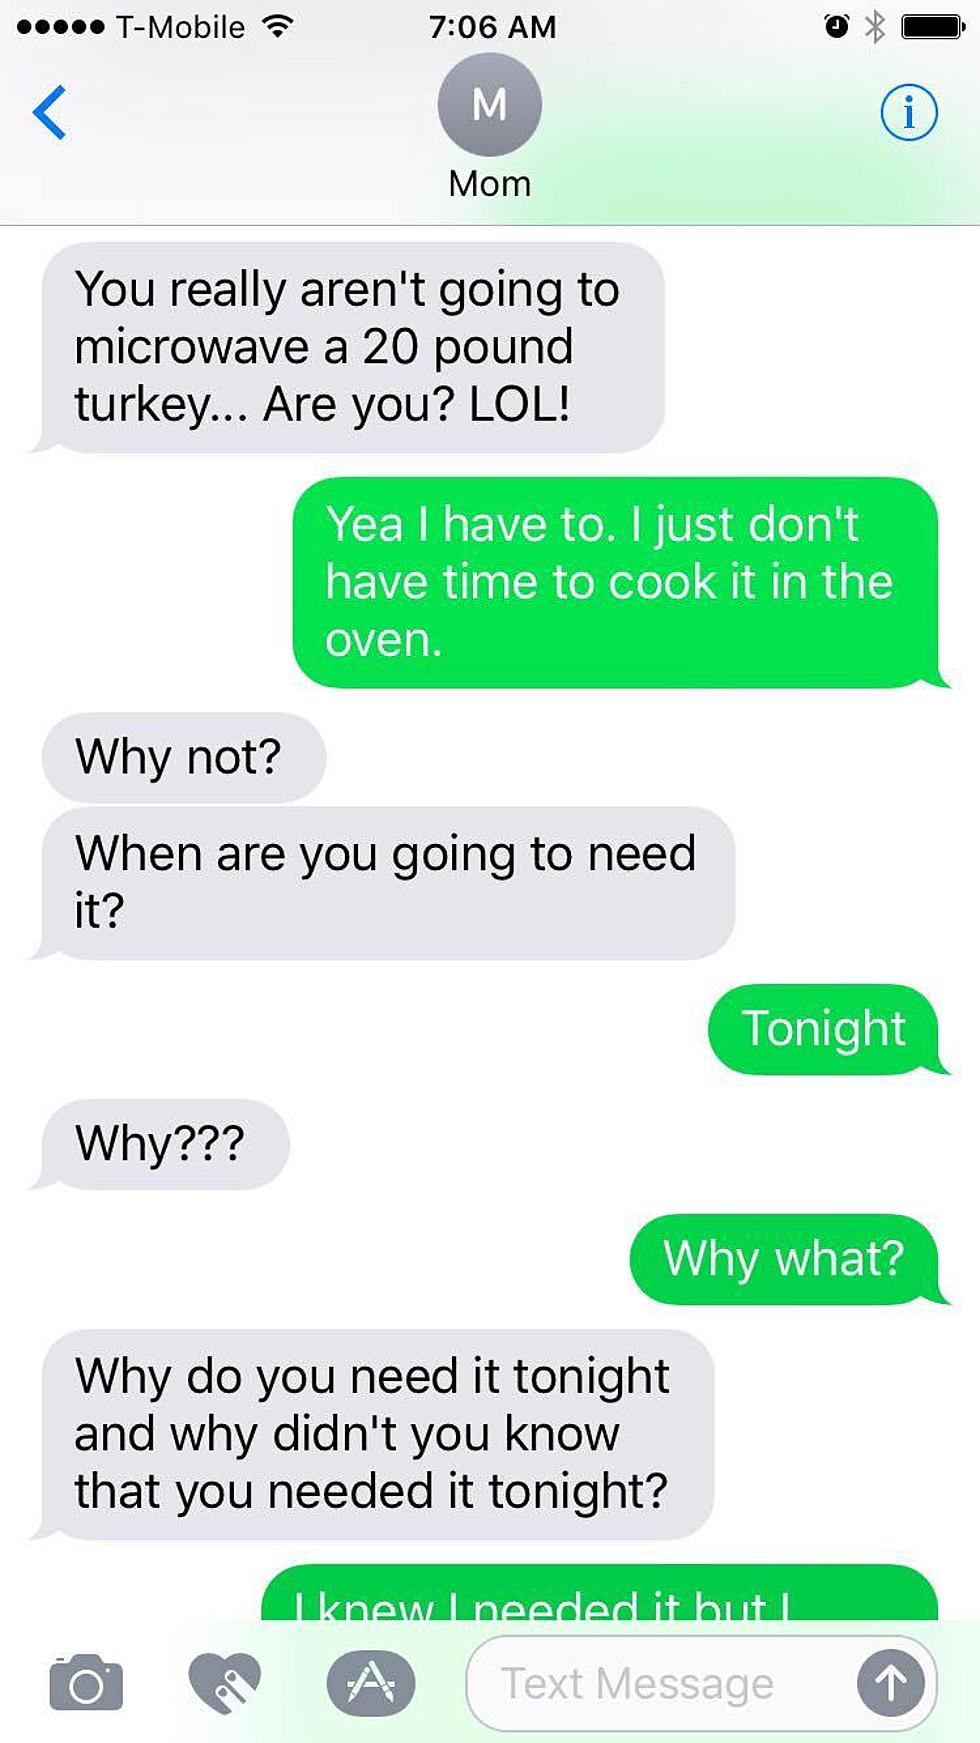 Nicole Texts Her Mom with a Prank She Saw on Facebook